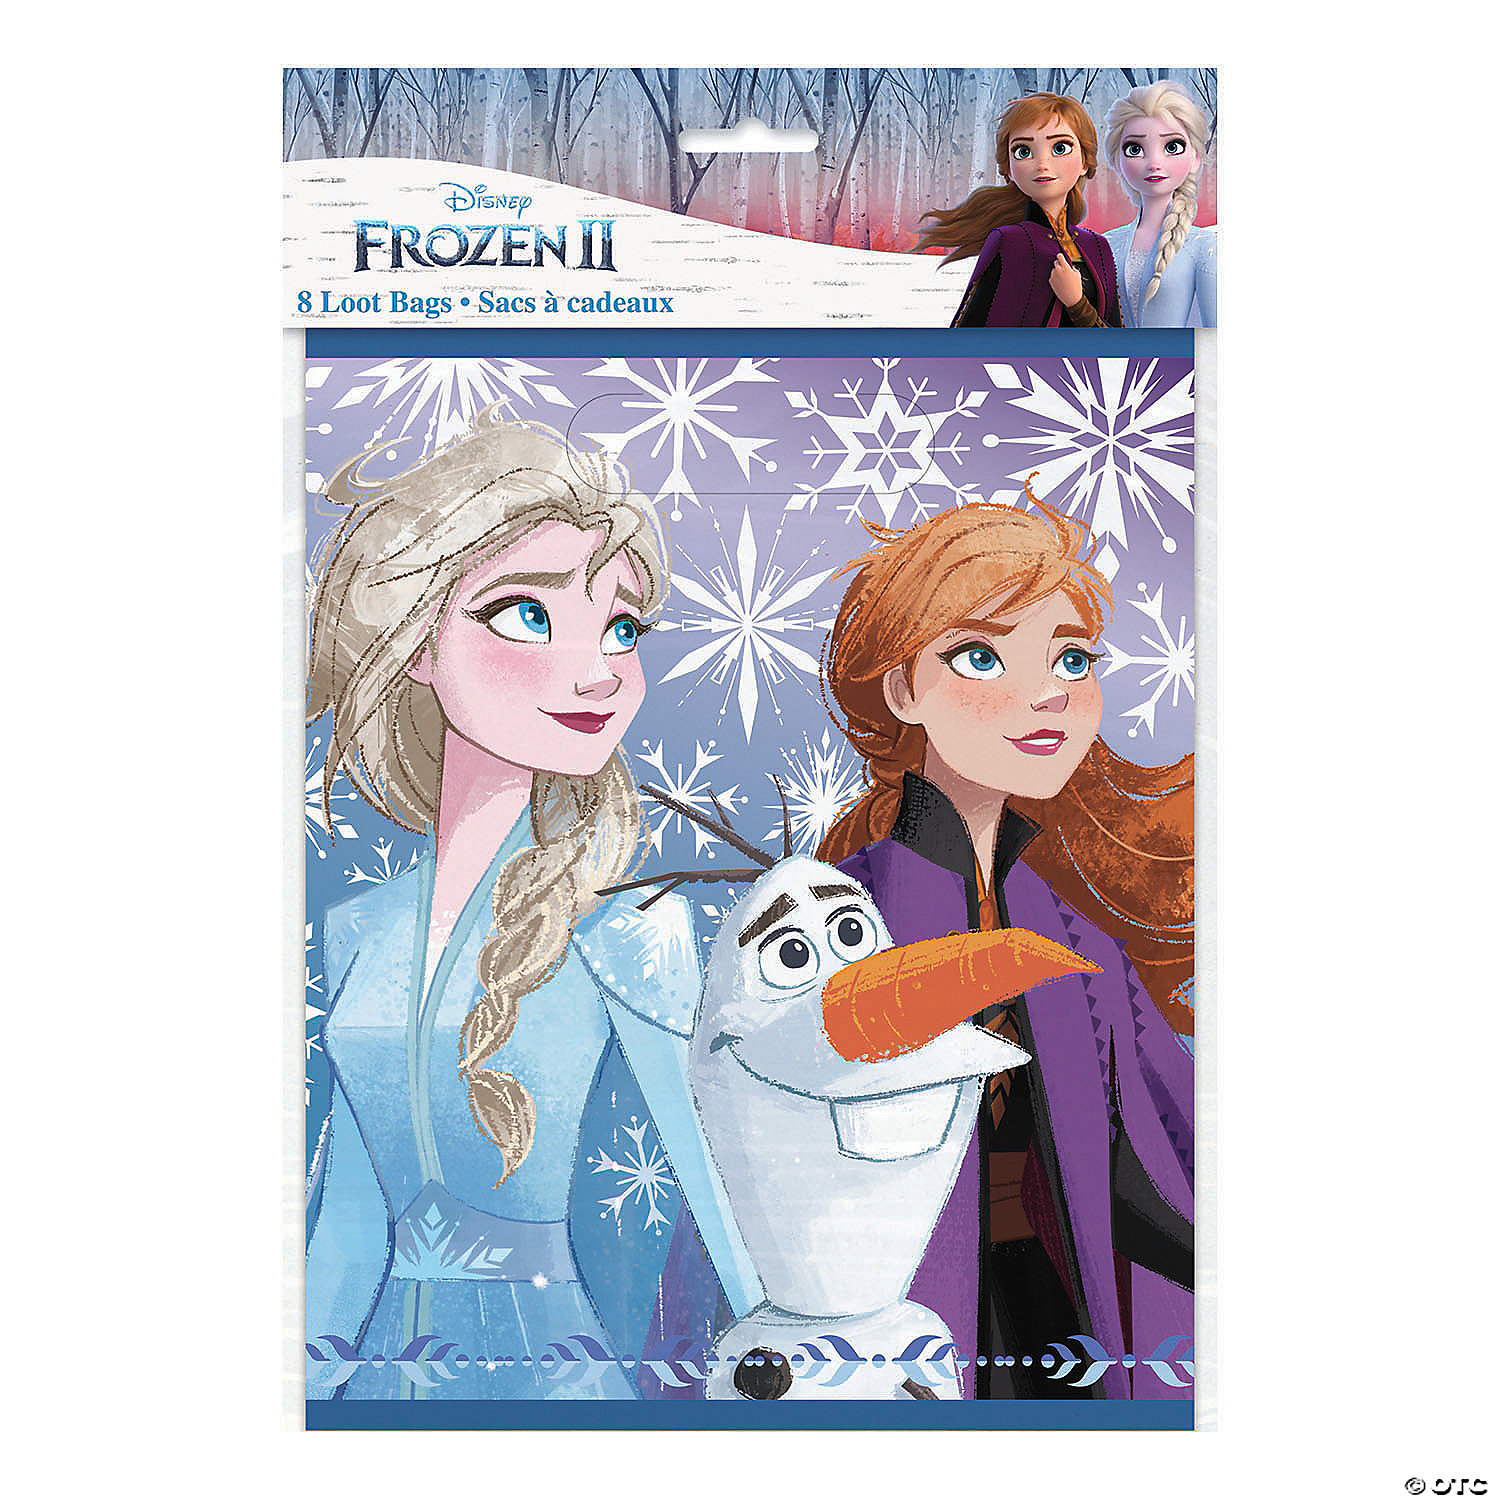 8 Frozen Movie Birthday Party Favors Personalized Invitations